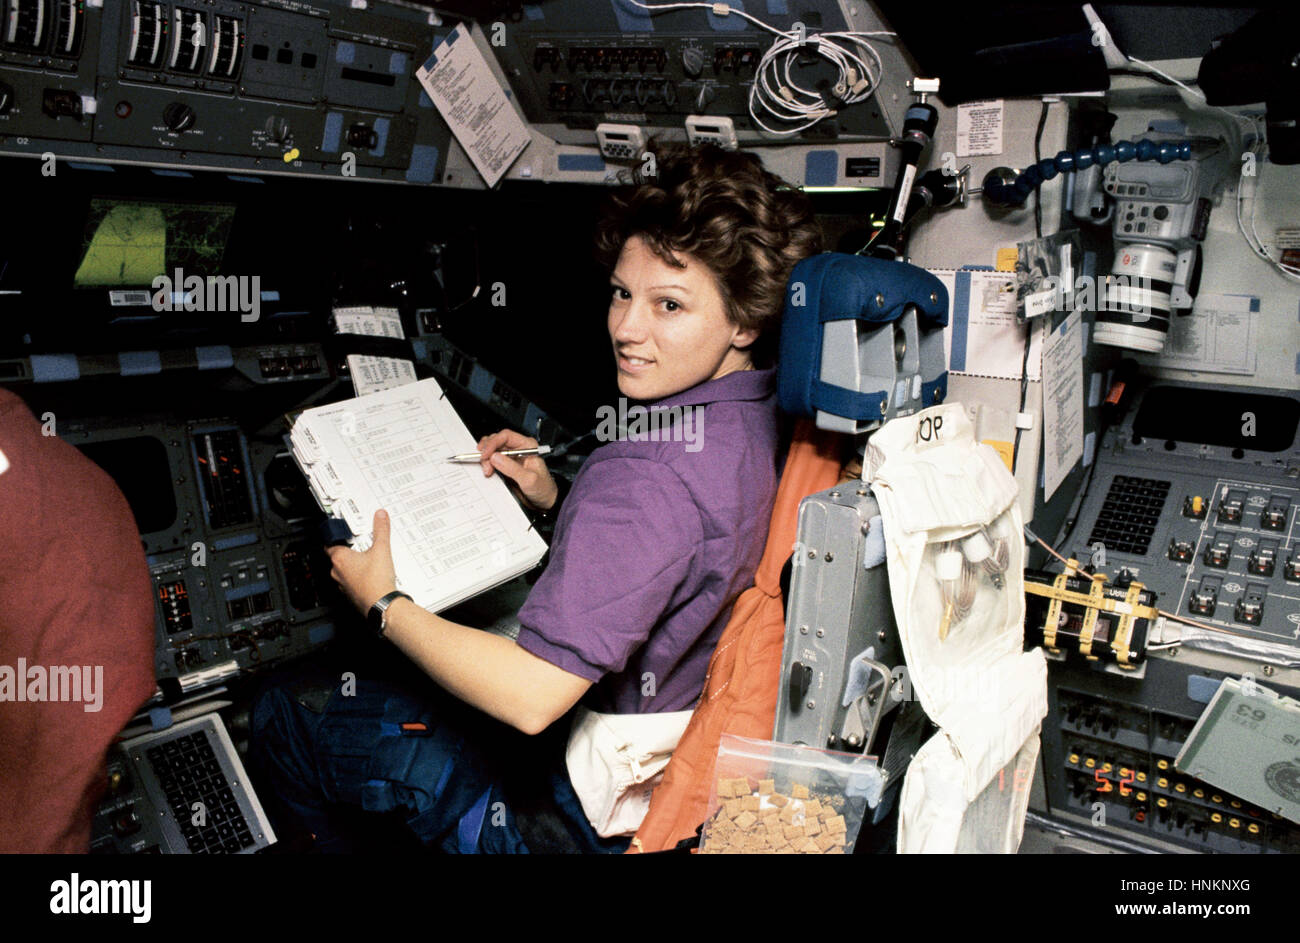 In this Feb. 3, 1995, image taken onboard space shuttle Discovery on flight day one of the STS-63 mission, astronaut Eileen M. Collins -- the first woman to pilot the shuttle -- is at the pilot's station during a 'hotfiring' procedure prior to rendezvous with the Russian Mir Space Station. Stock Photo